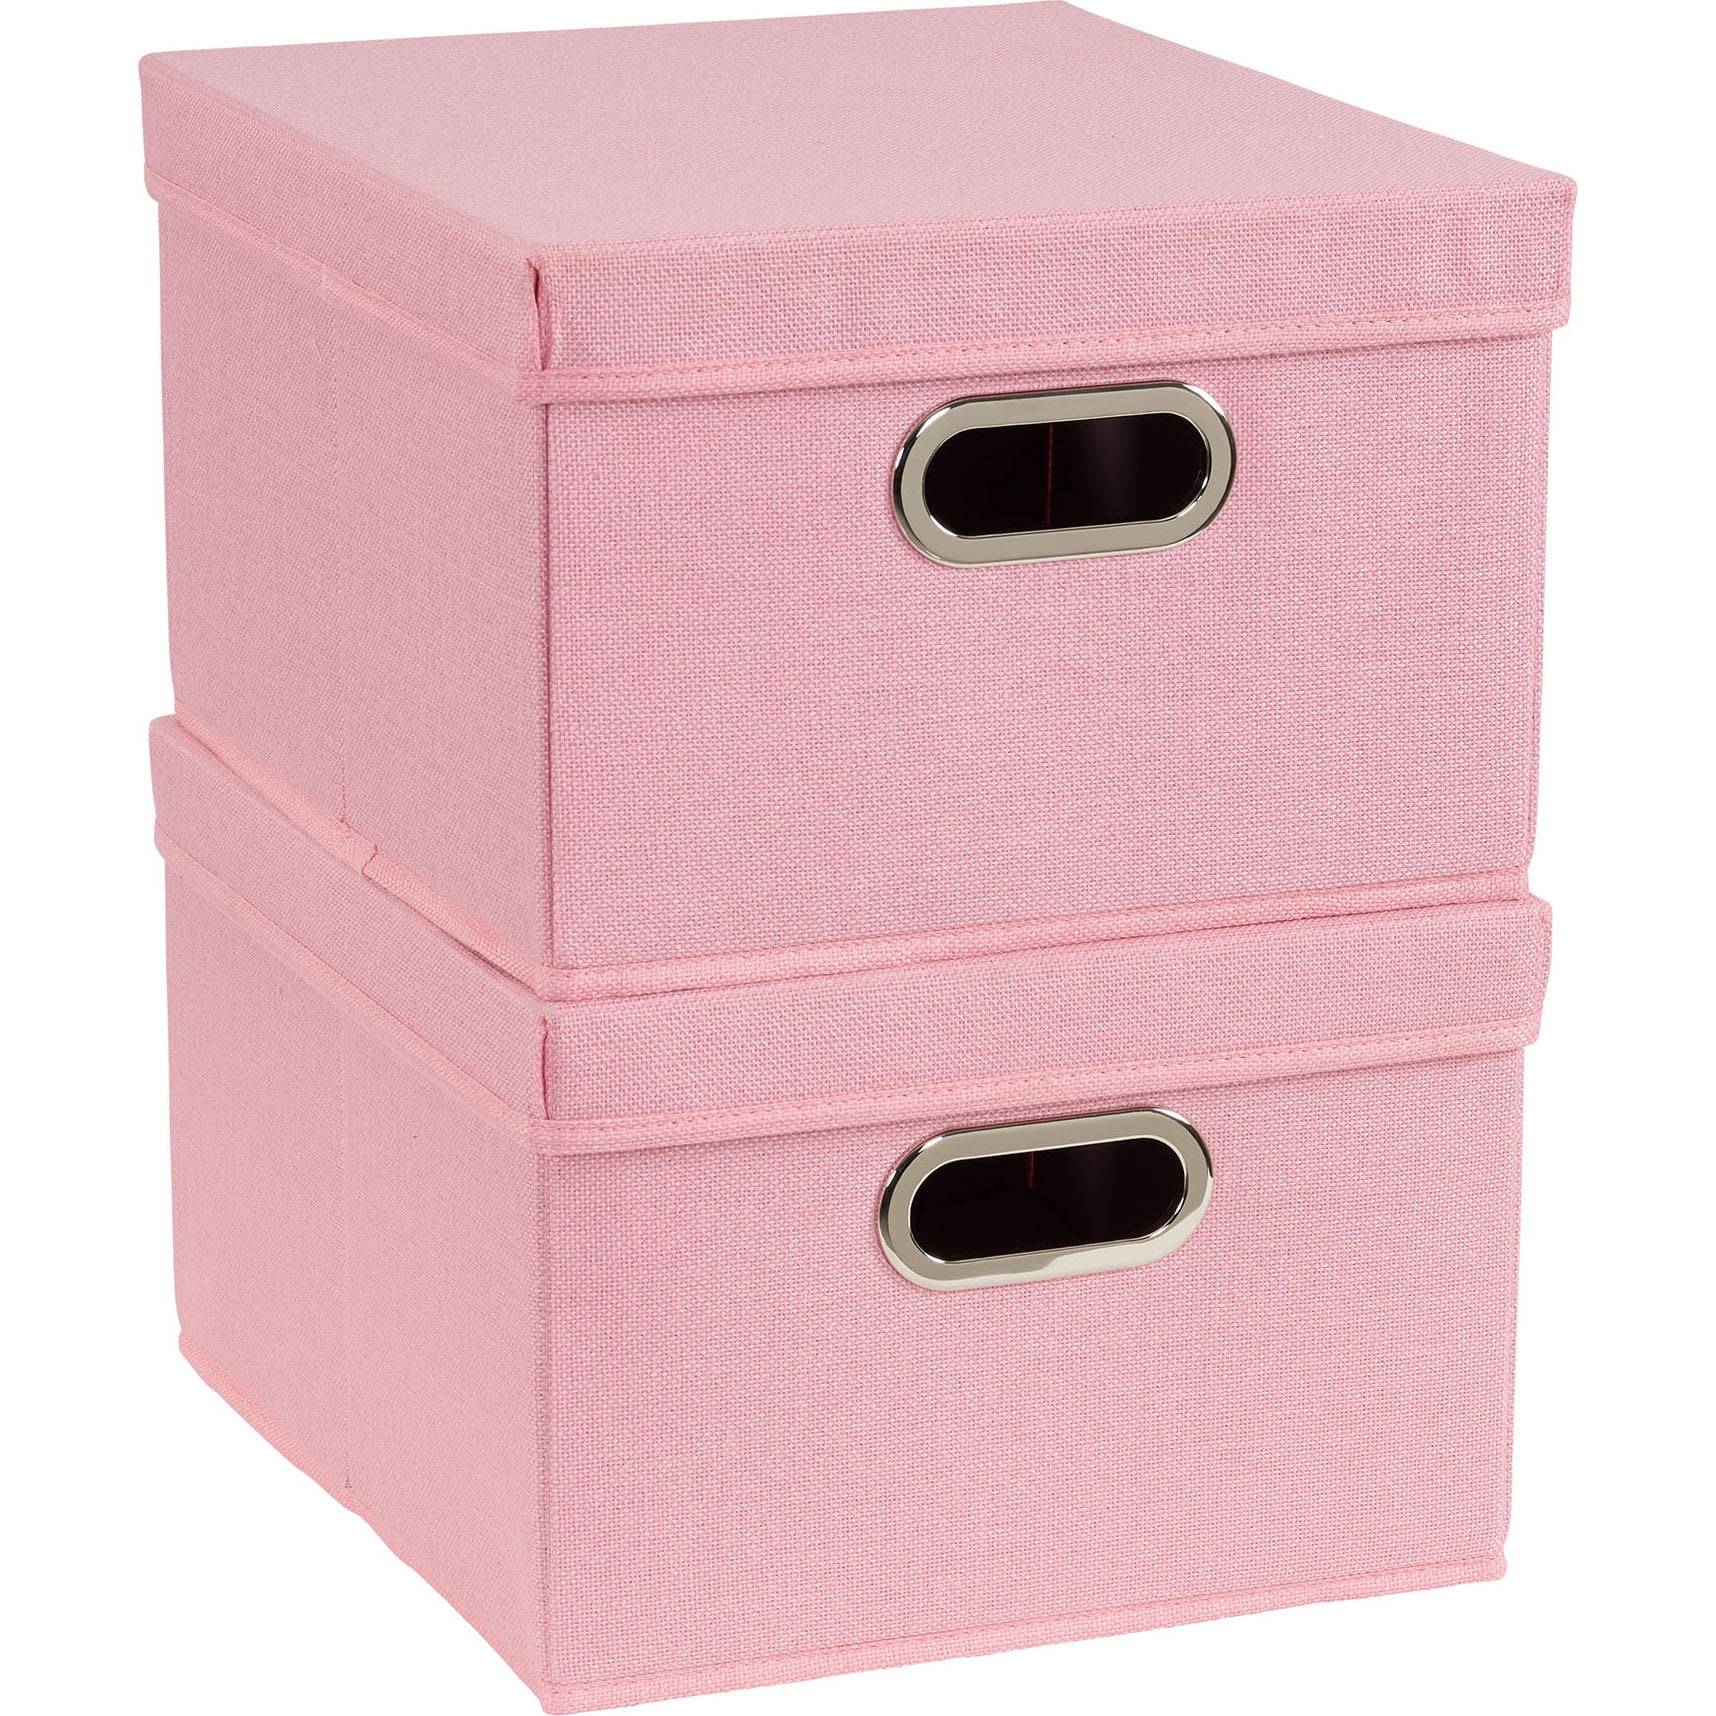 HOUSEHOLD ESSENTIALS Collapsible Linen Storage Boxes, 2pk, Carnation